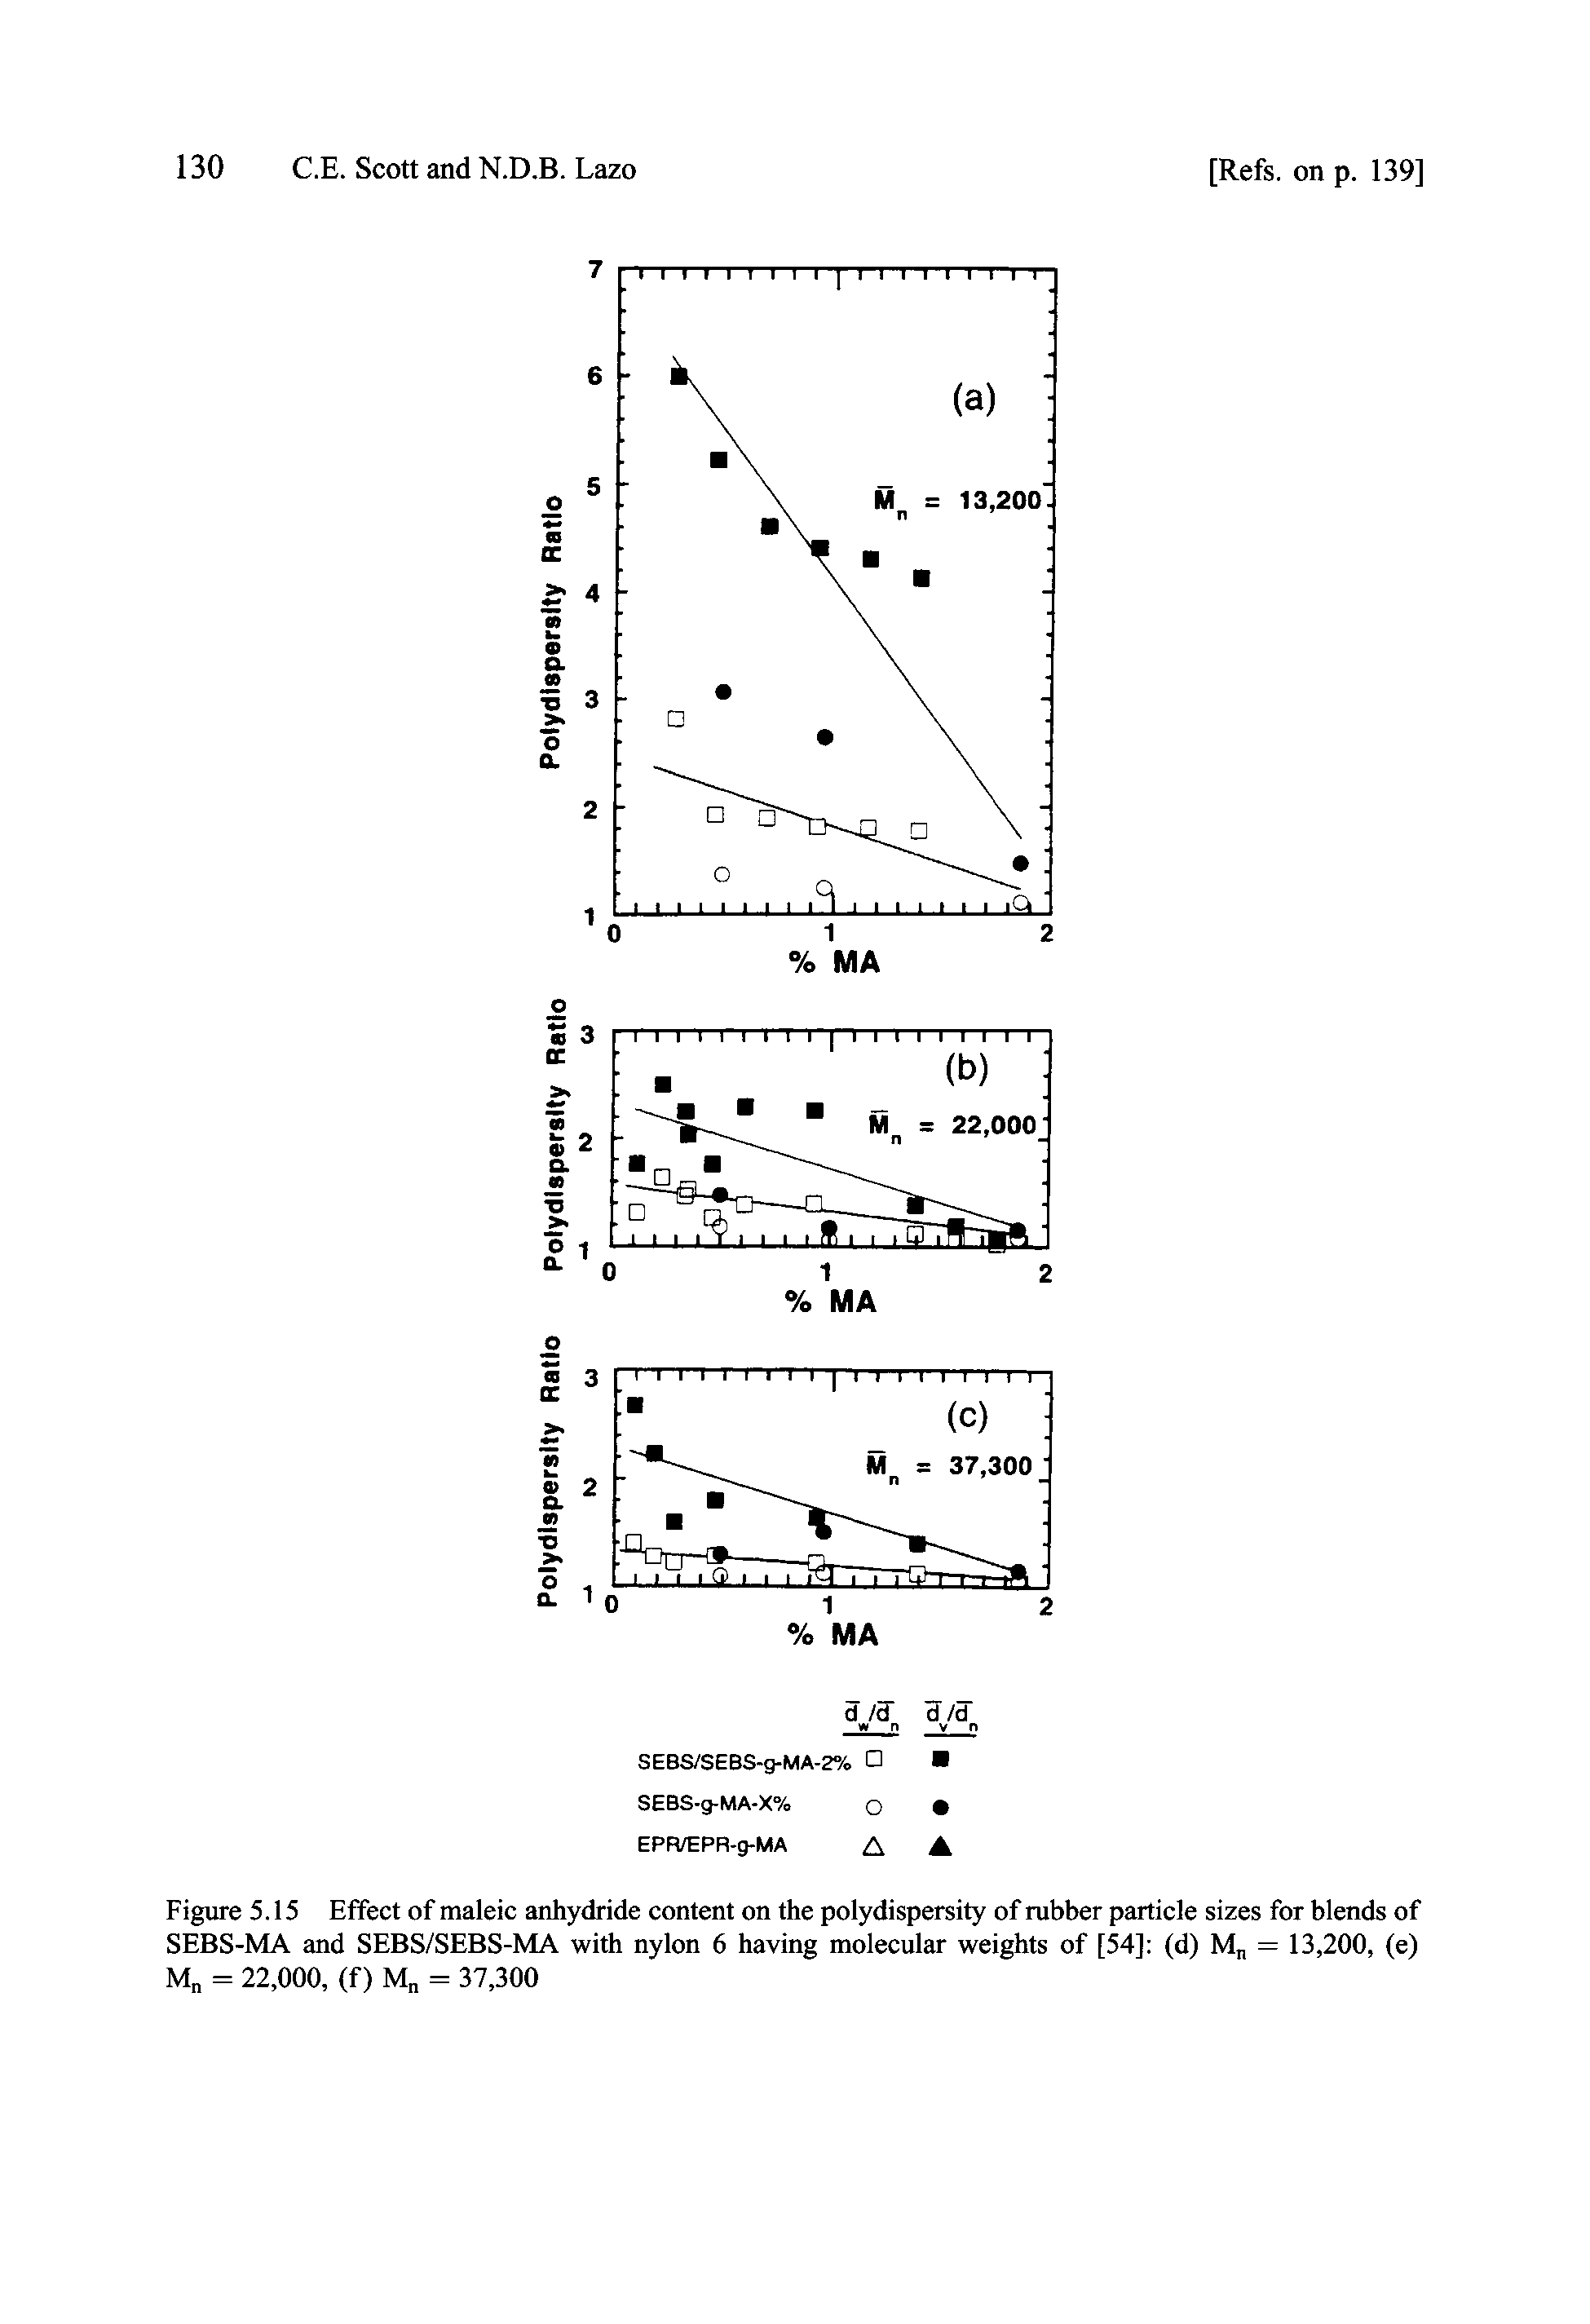 Figure 5.15 Effect of maleic anhydride content on the polydispersity of rubber particle sizes for blends of SEBS-MA and SEBS/SEBS-MA with nylon 6 having molecular weights of [54] (d) M = 13,200, (e) M = 22,000, (f) M = 37,300...